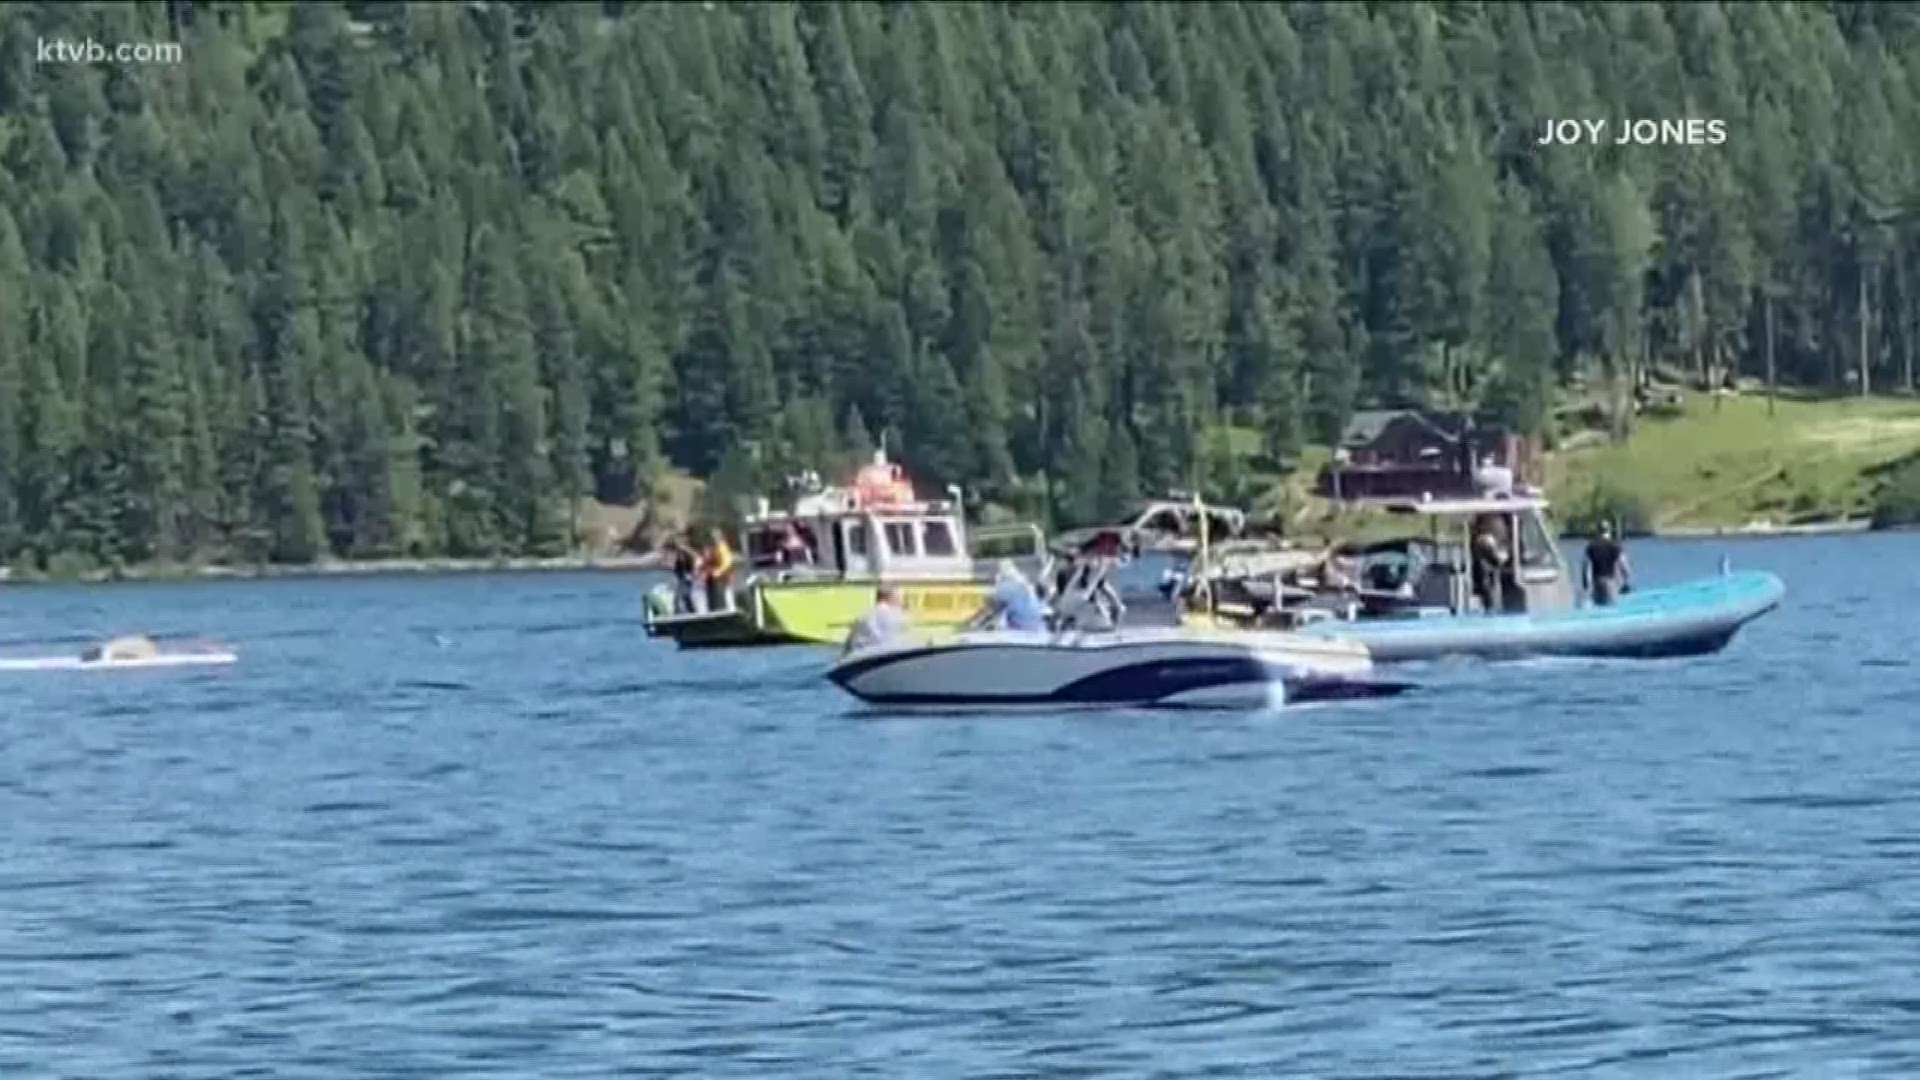 Authorities believe eight people died when two planes collided over Lake Coeur d'Alene on Sunday.